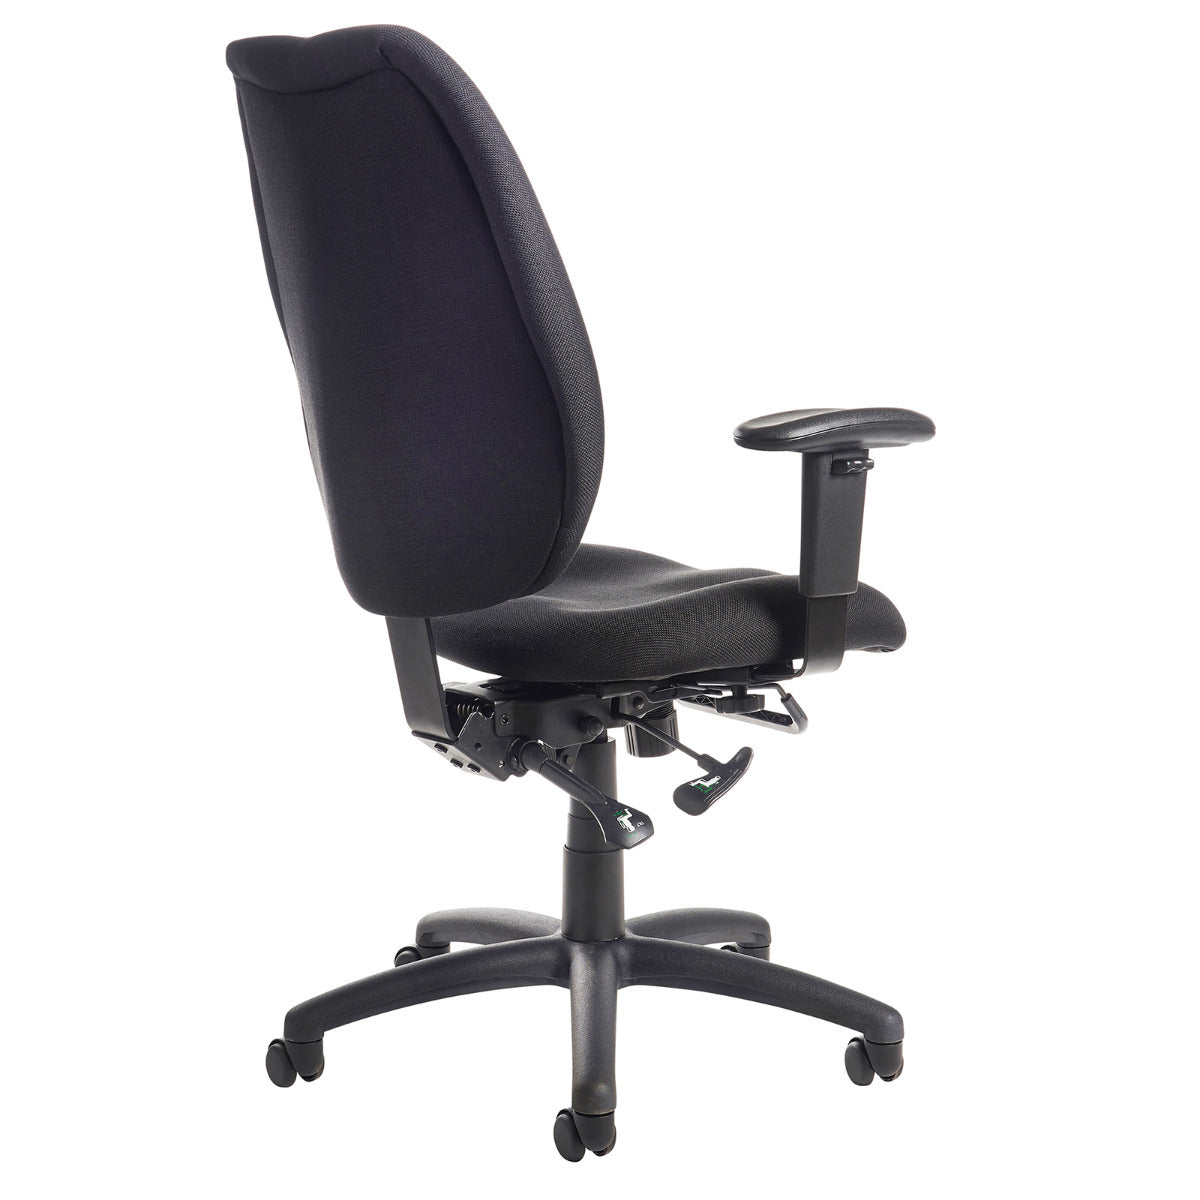 Cornwall High Back Fabric Operator/Office Chair - Black or Blue Option